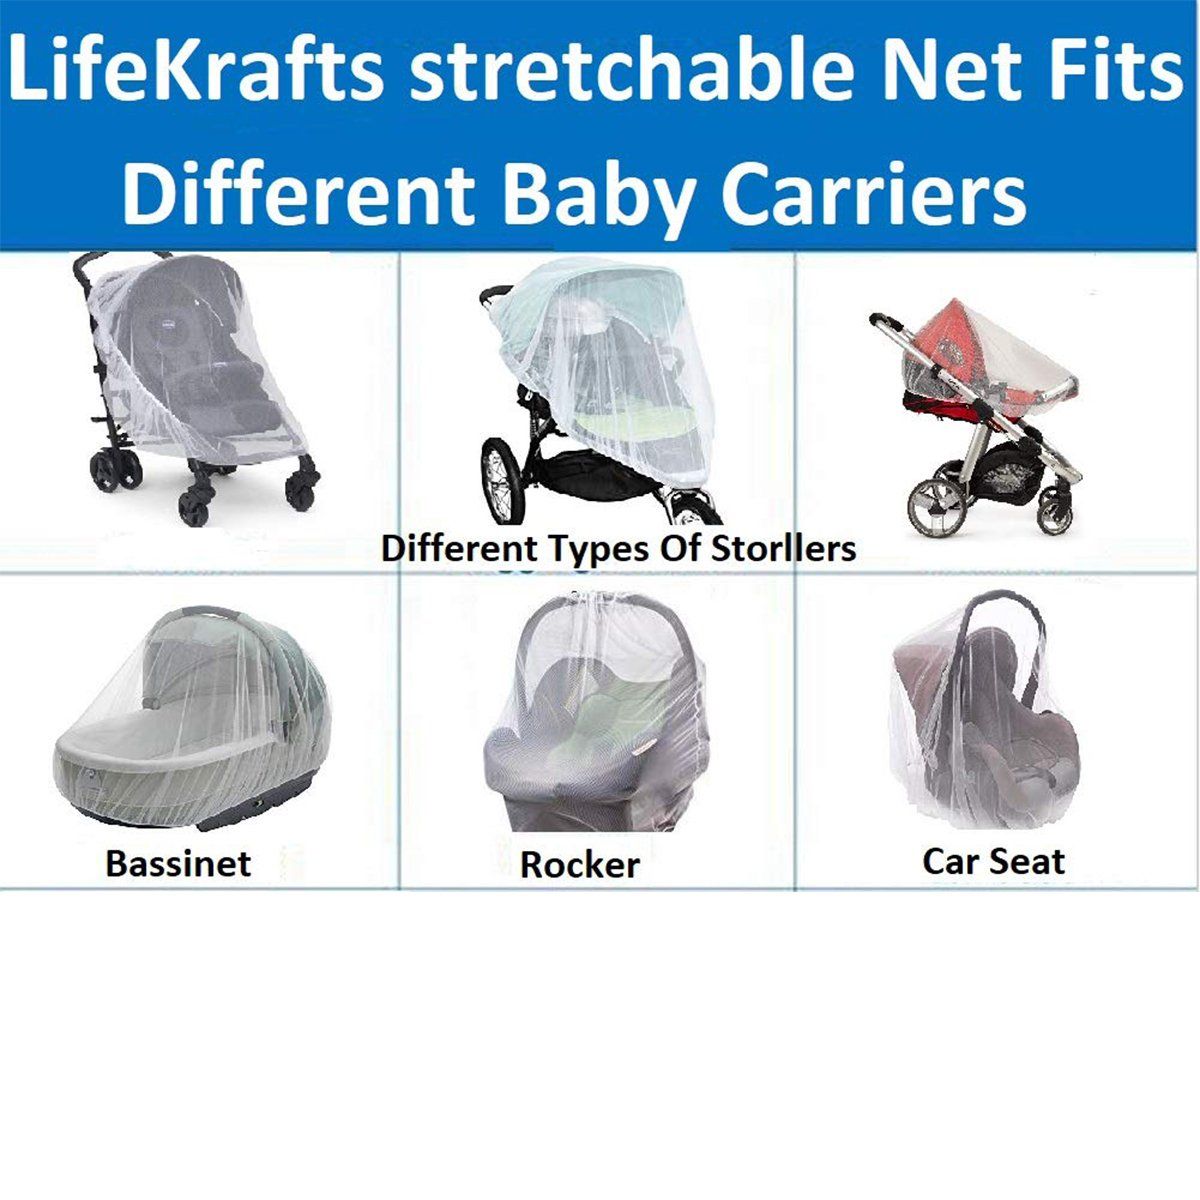 Stroller Mosquito Net for Baby, Cribs, Bassinets & Car seats LifeKrafts